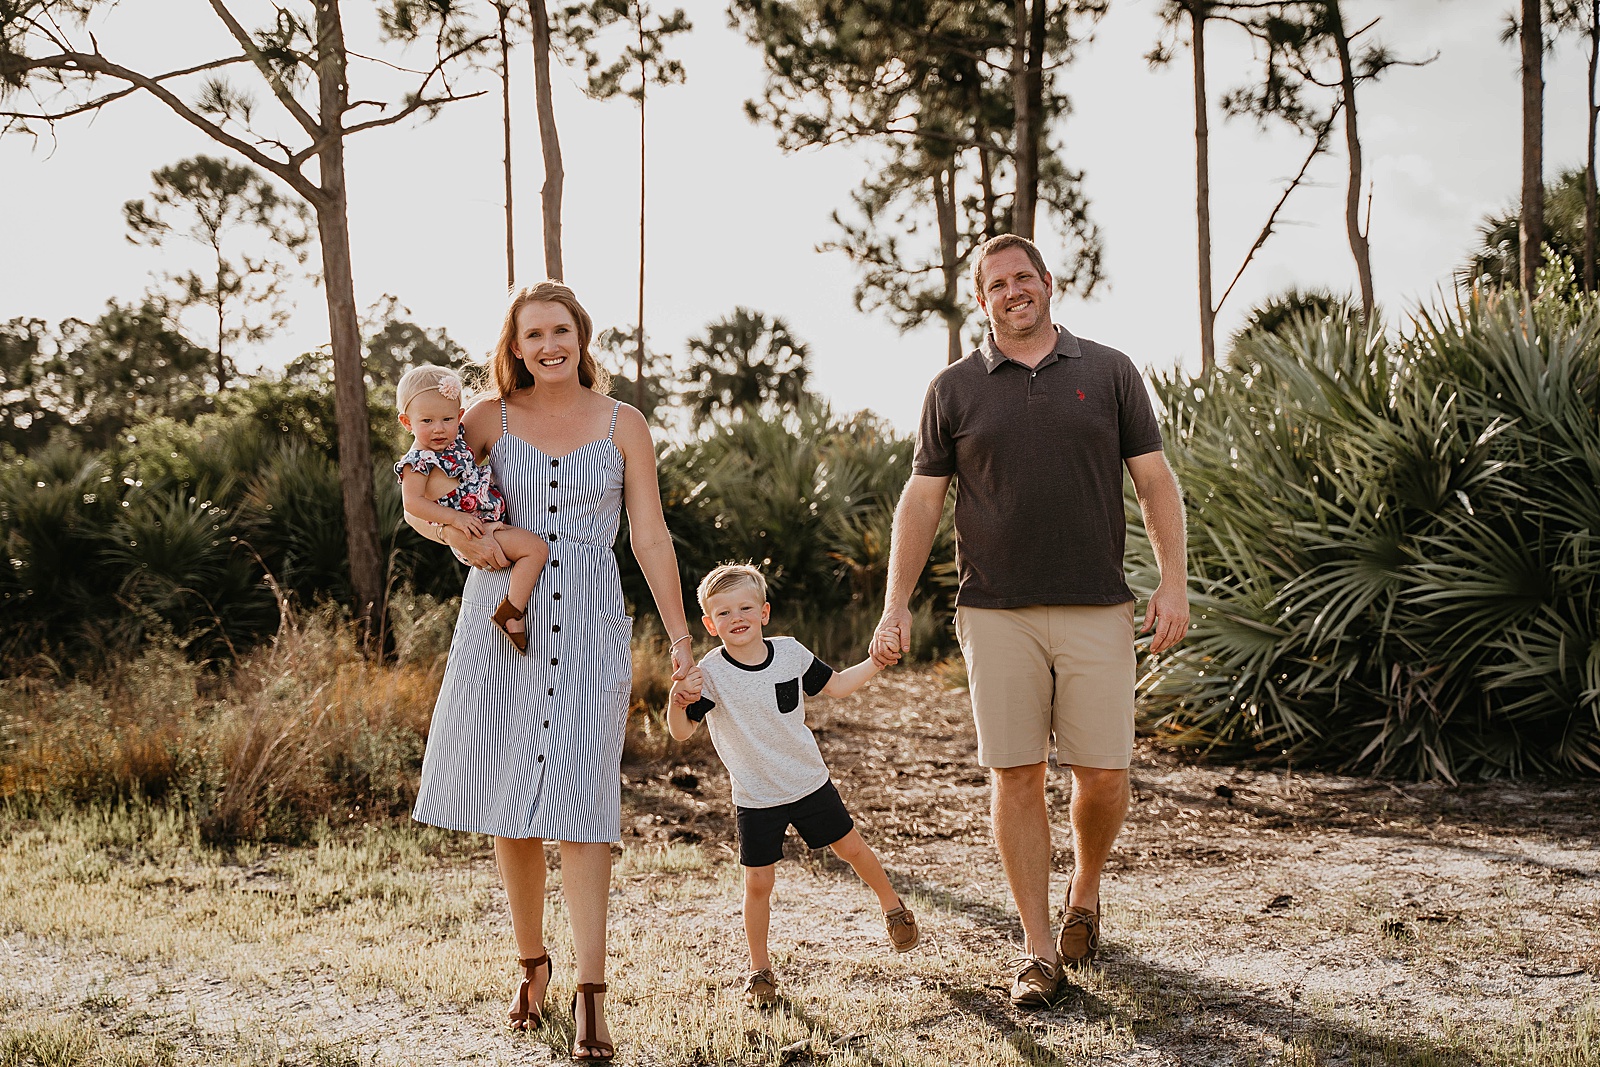 Royal Palm Beach Family Session captured by South Florida Lifestyle Photographer, Krystal Capone Photography.